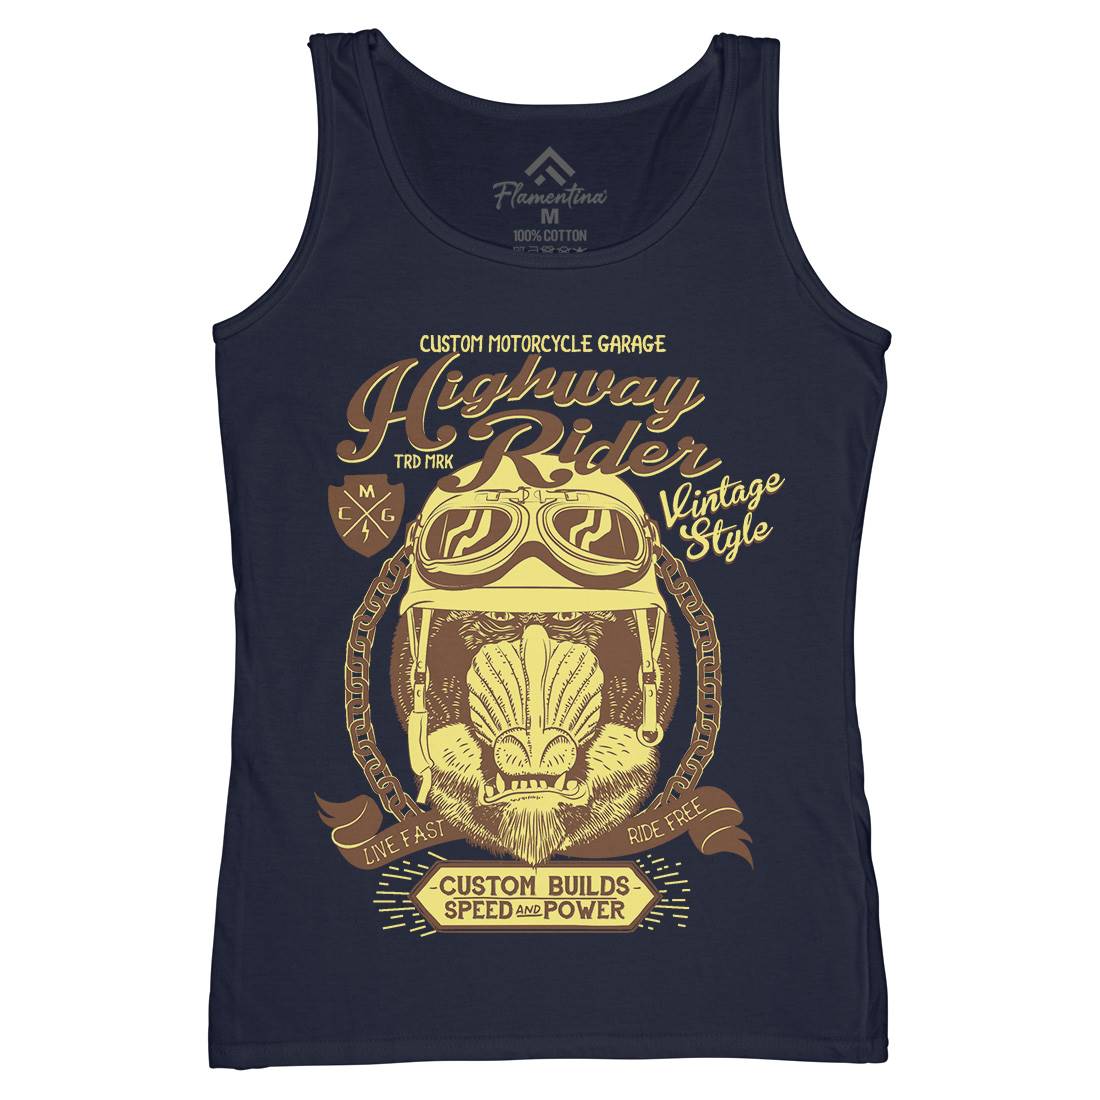 Highway Rider Womens Organic Tank Top Vest Motorcycles A999